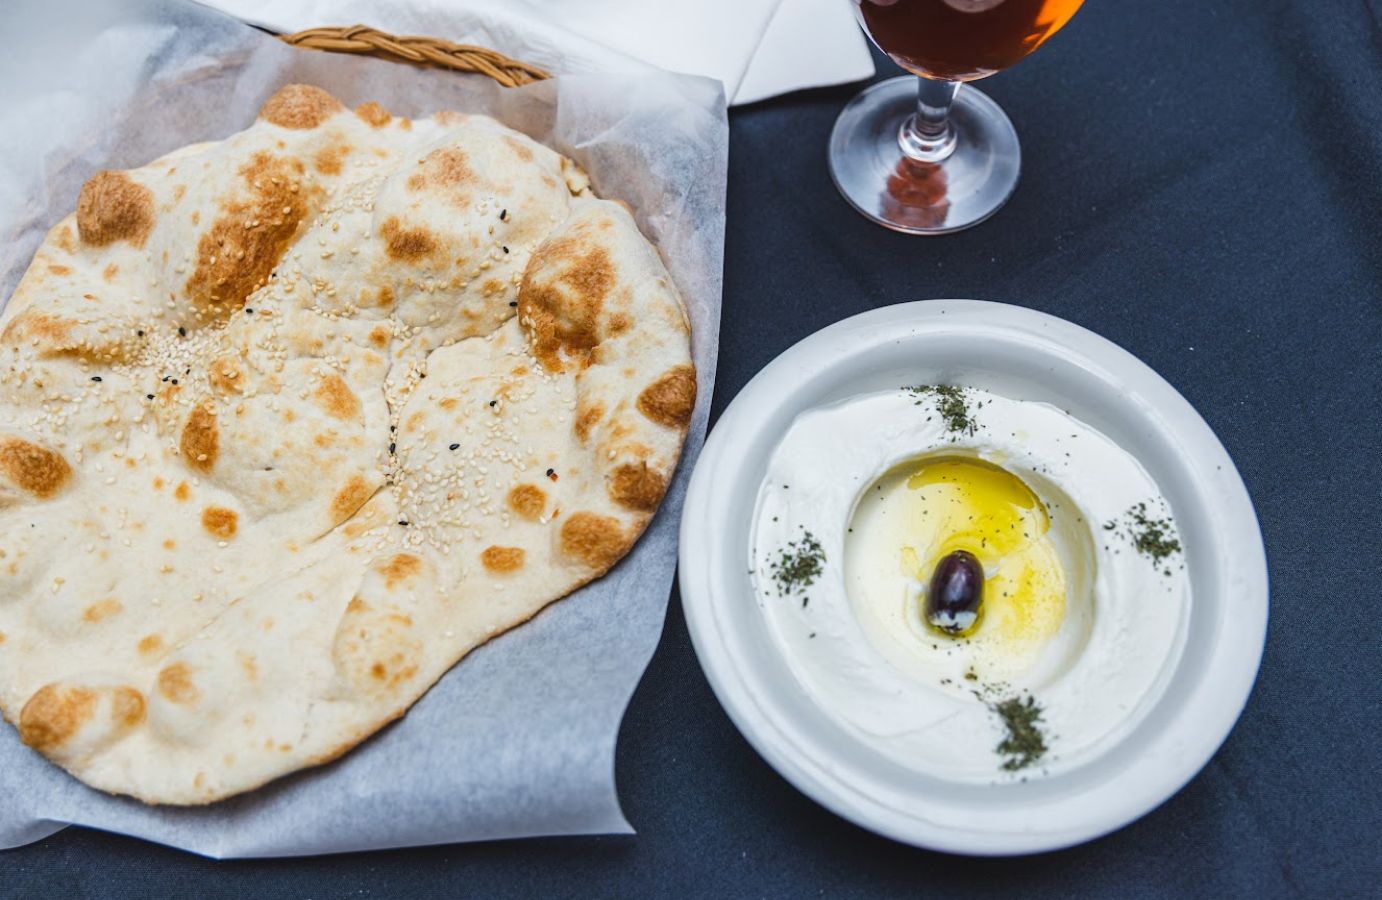 Top view of a Lebanese pita bread and a bowl of dipping sauce